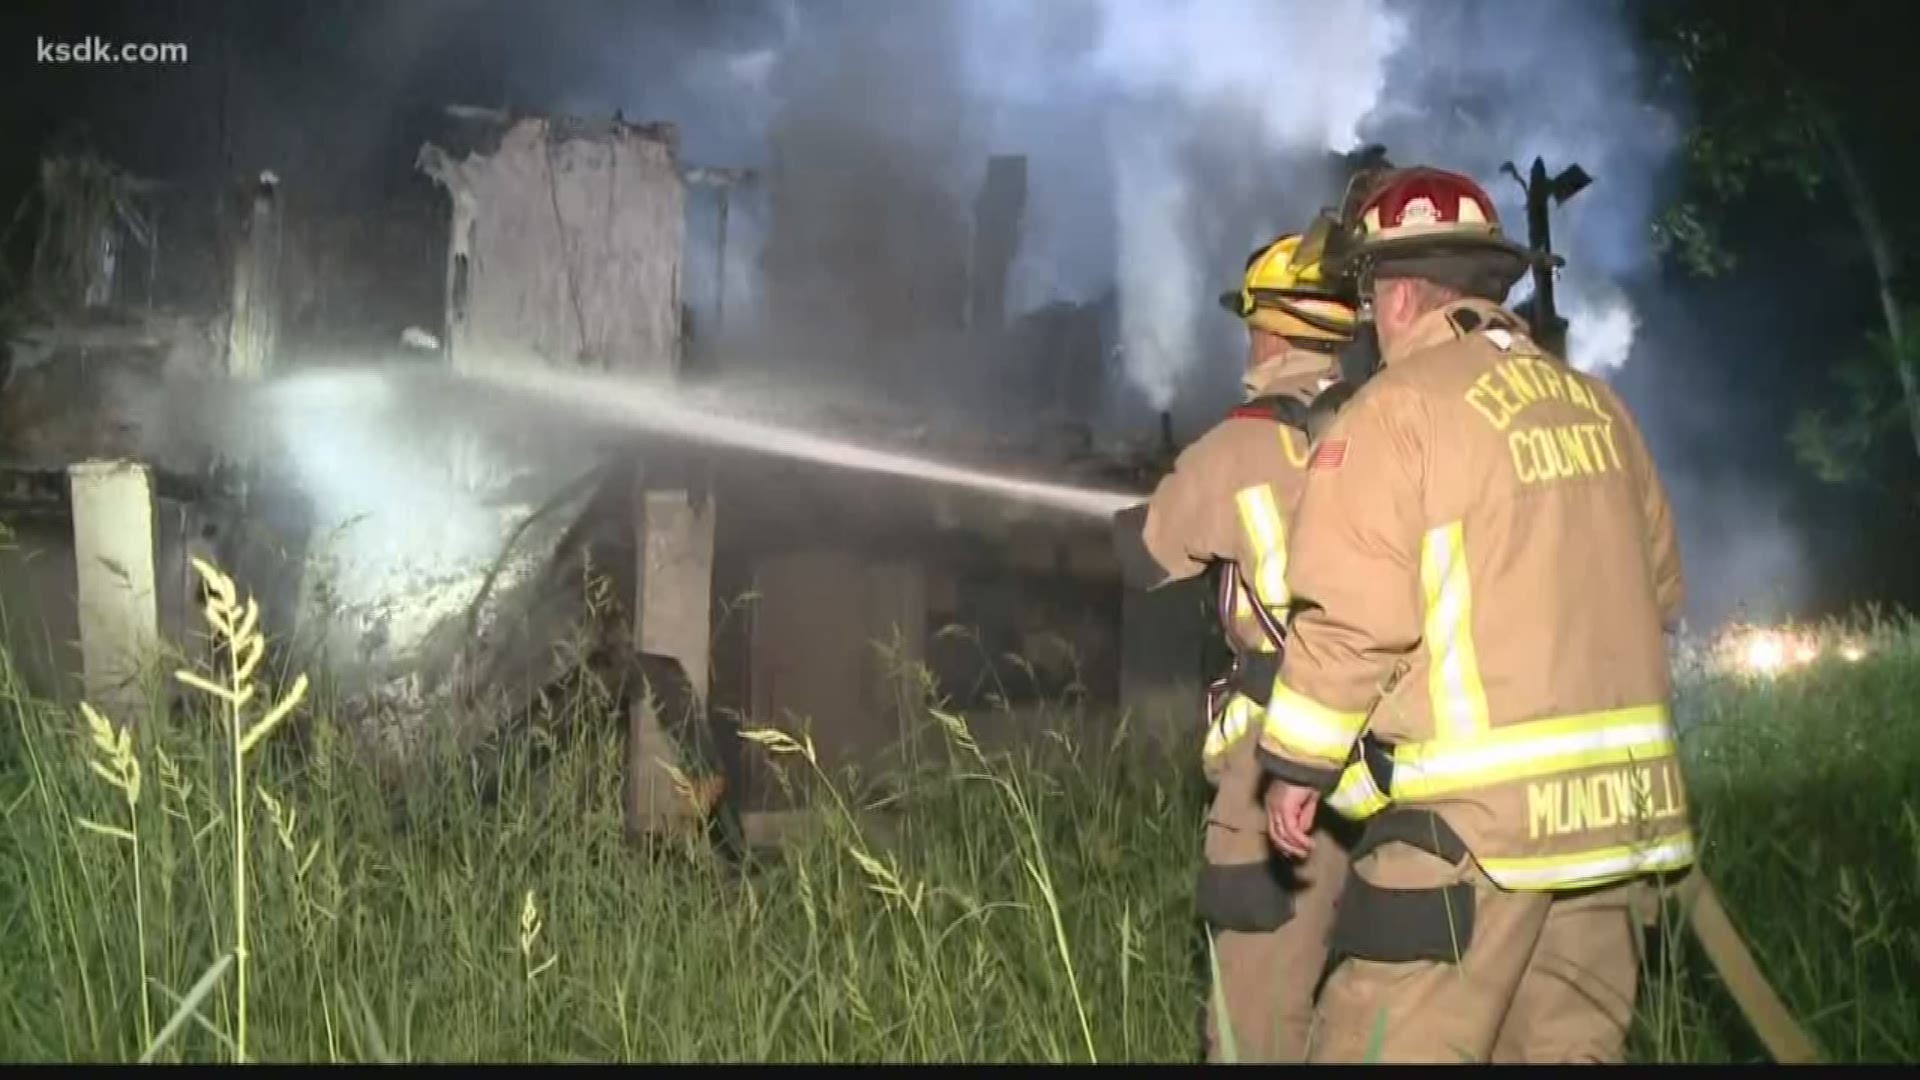 Twenty firefighters spend more than two hours battling fire in St. Charles County.